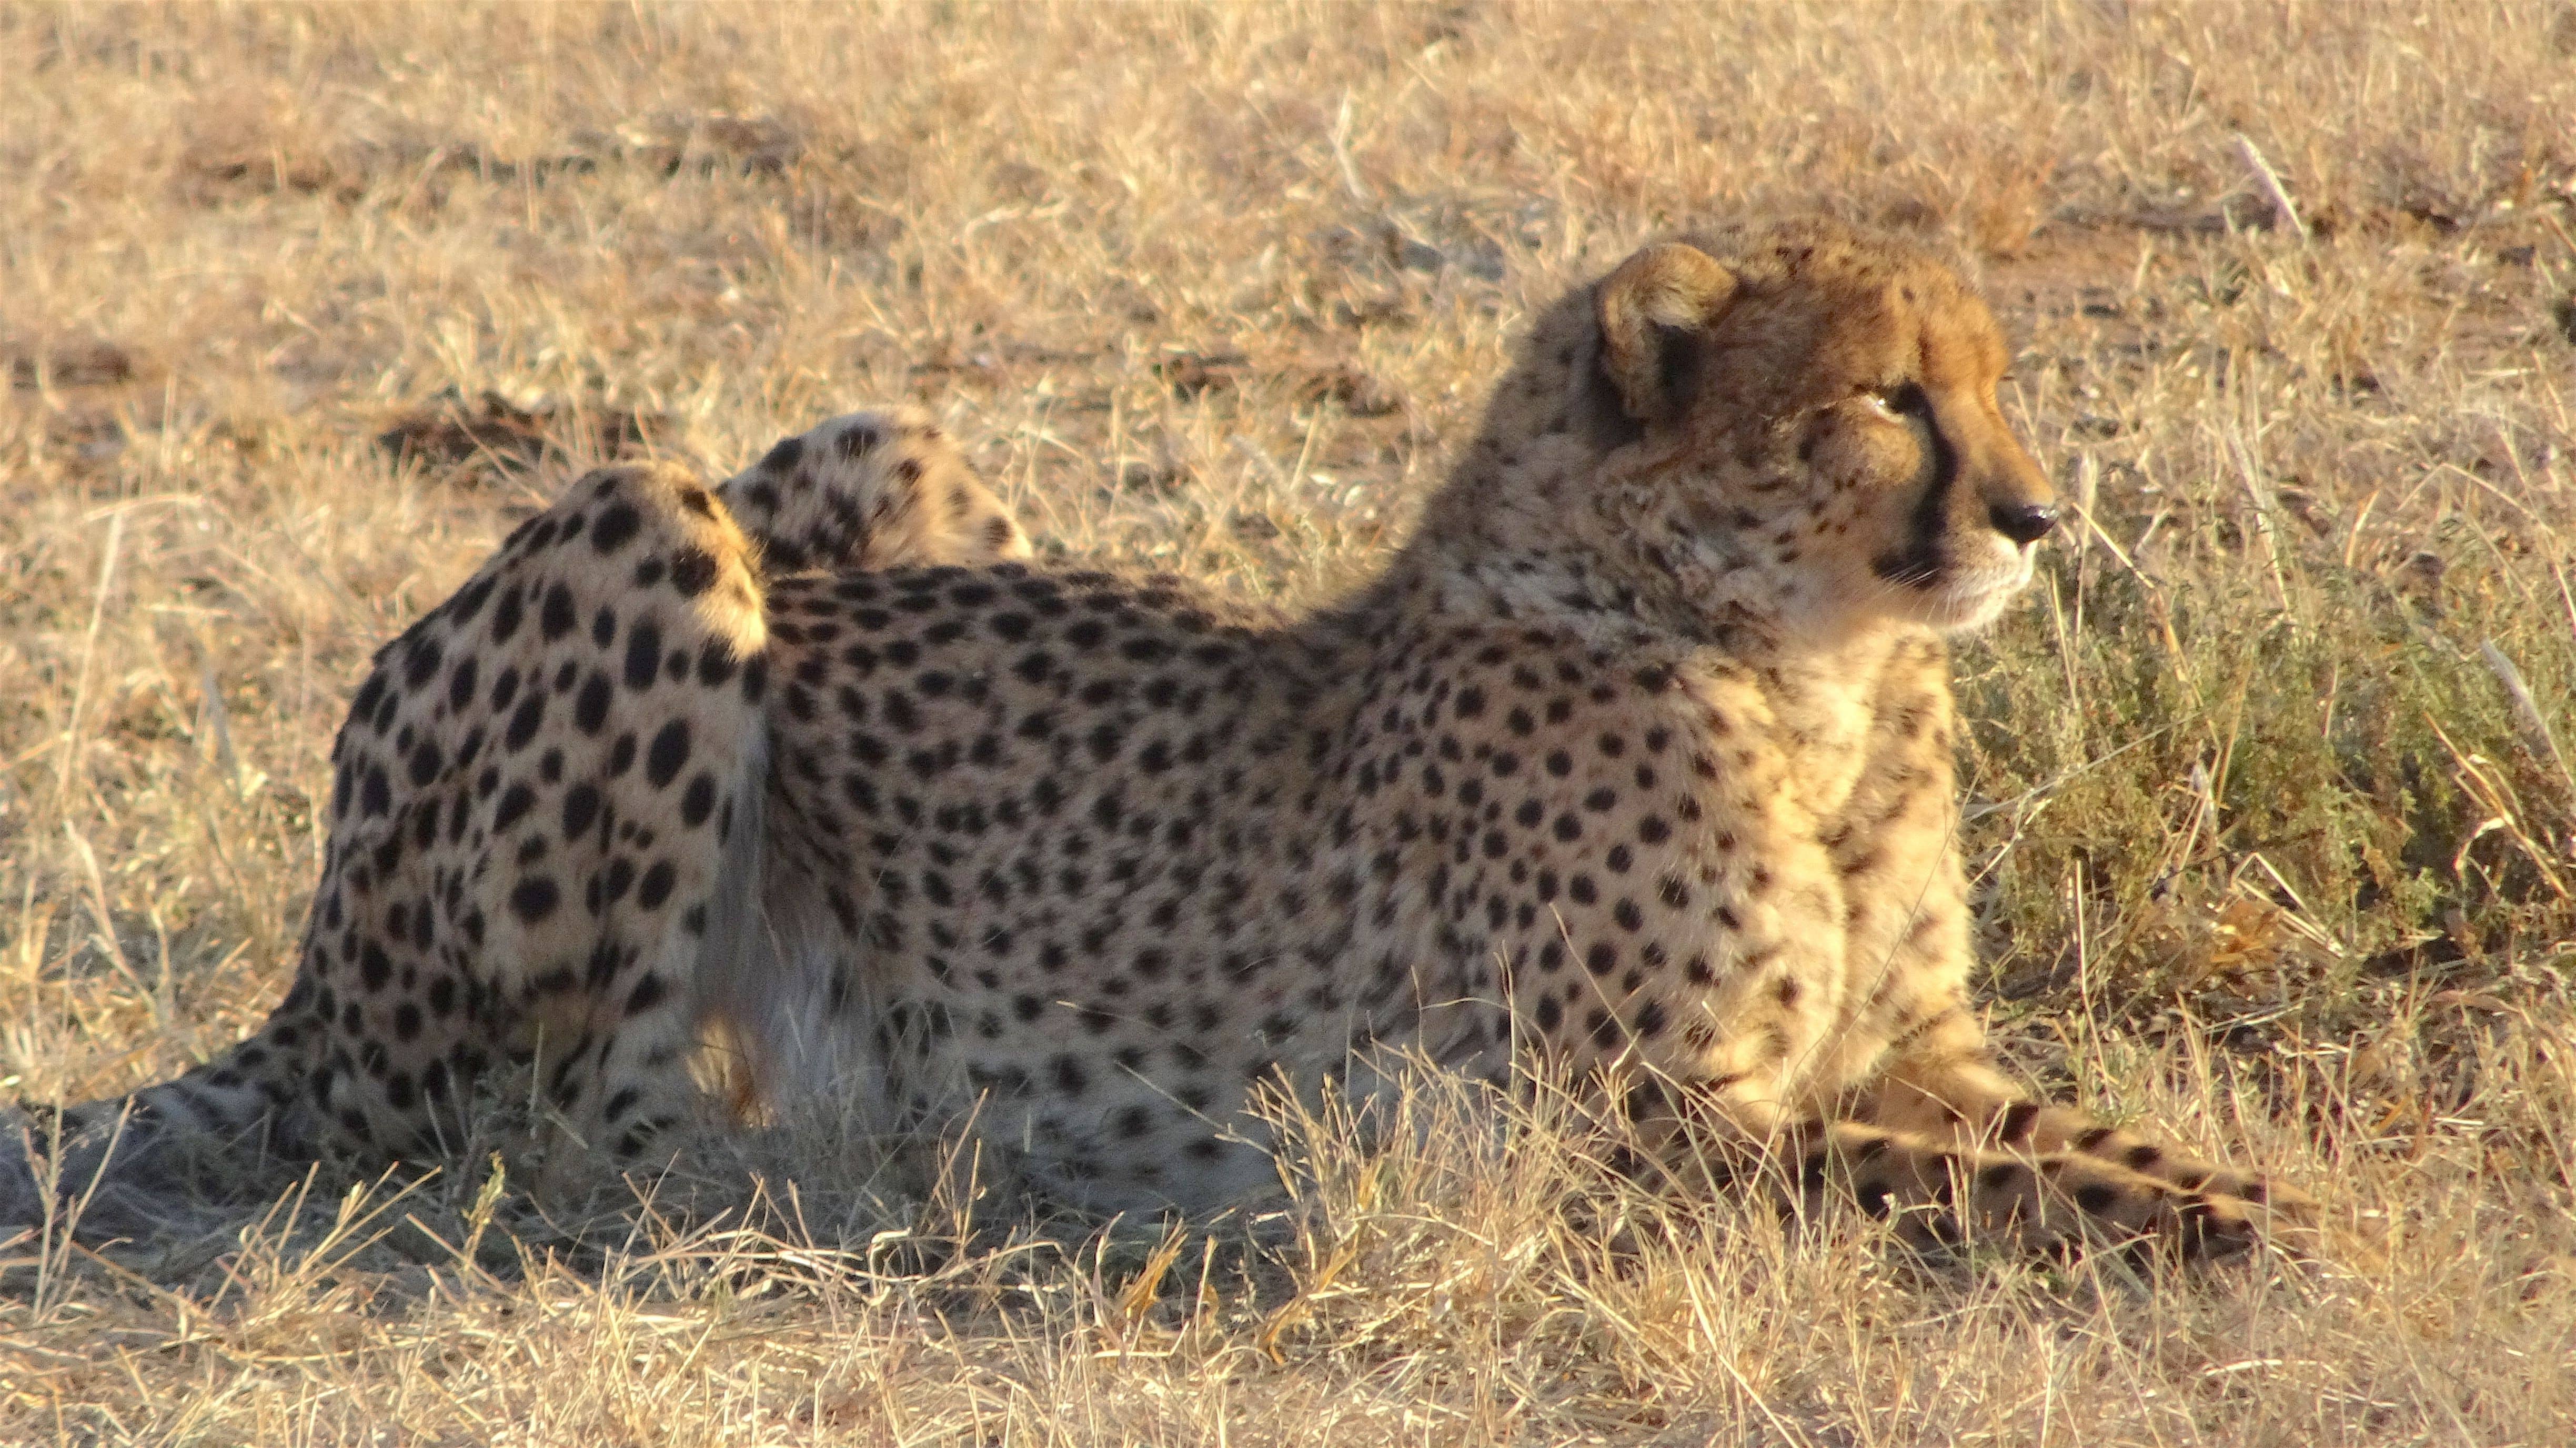 A cheetah at the Cheetah Conservation Fund in Namibia.